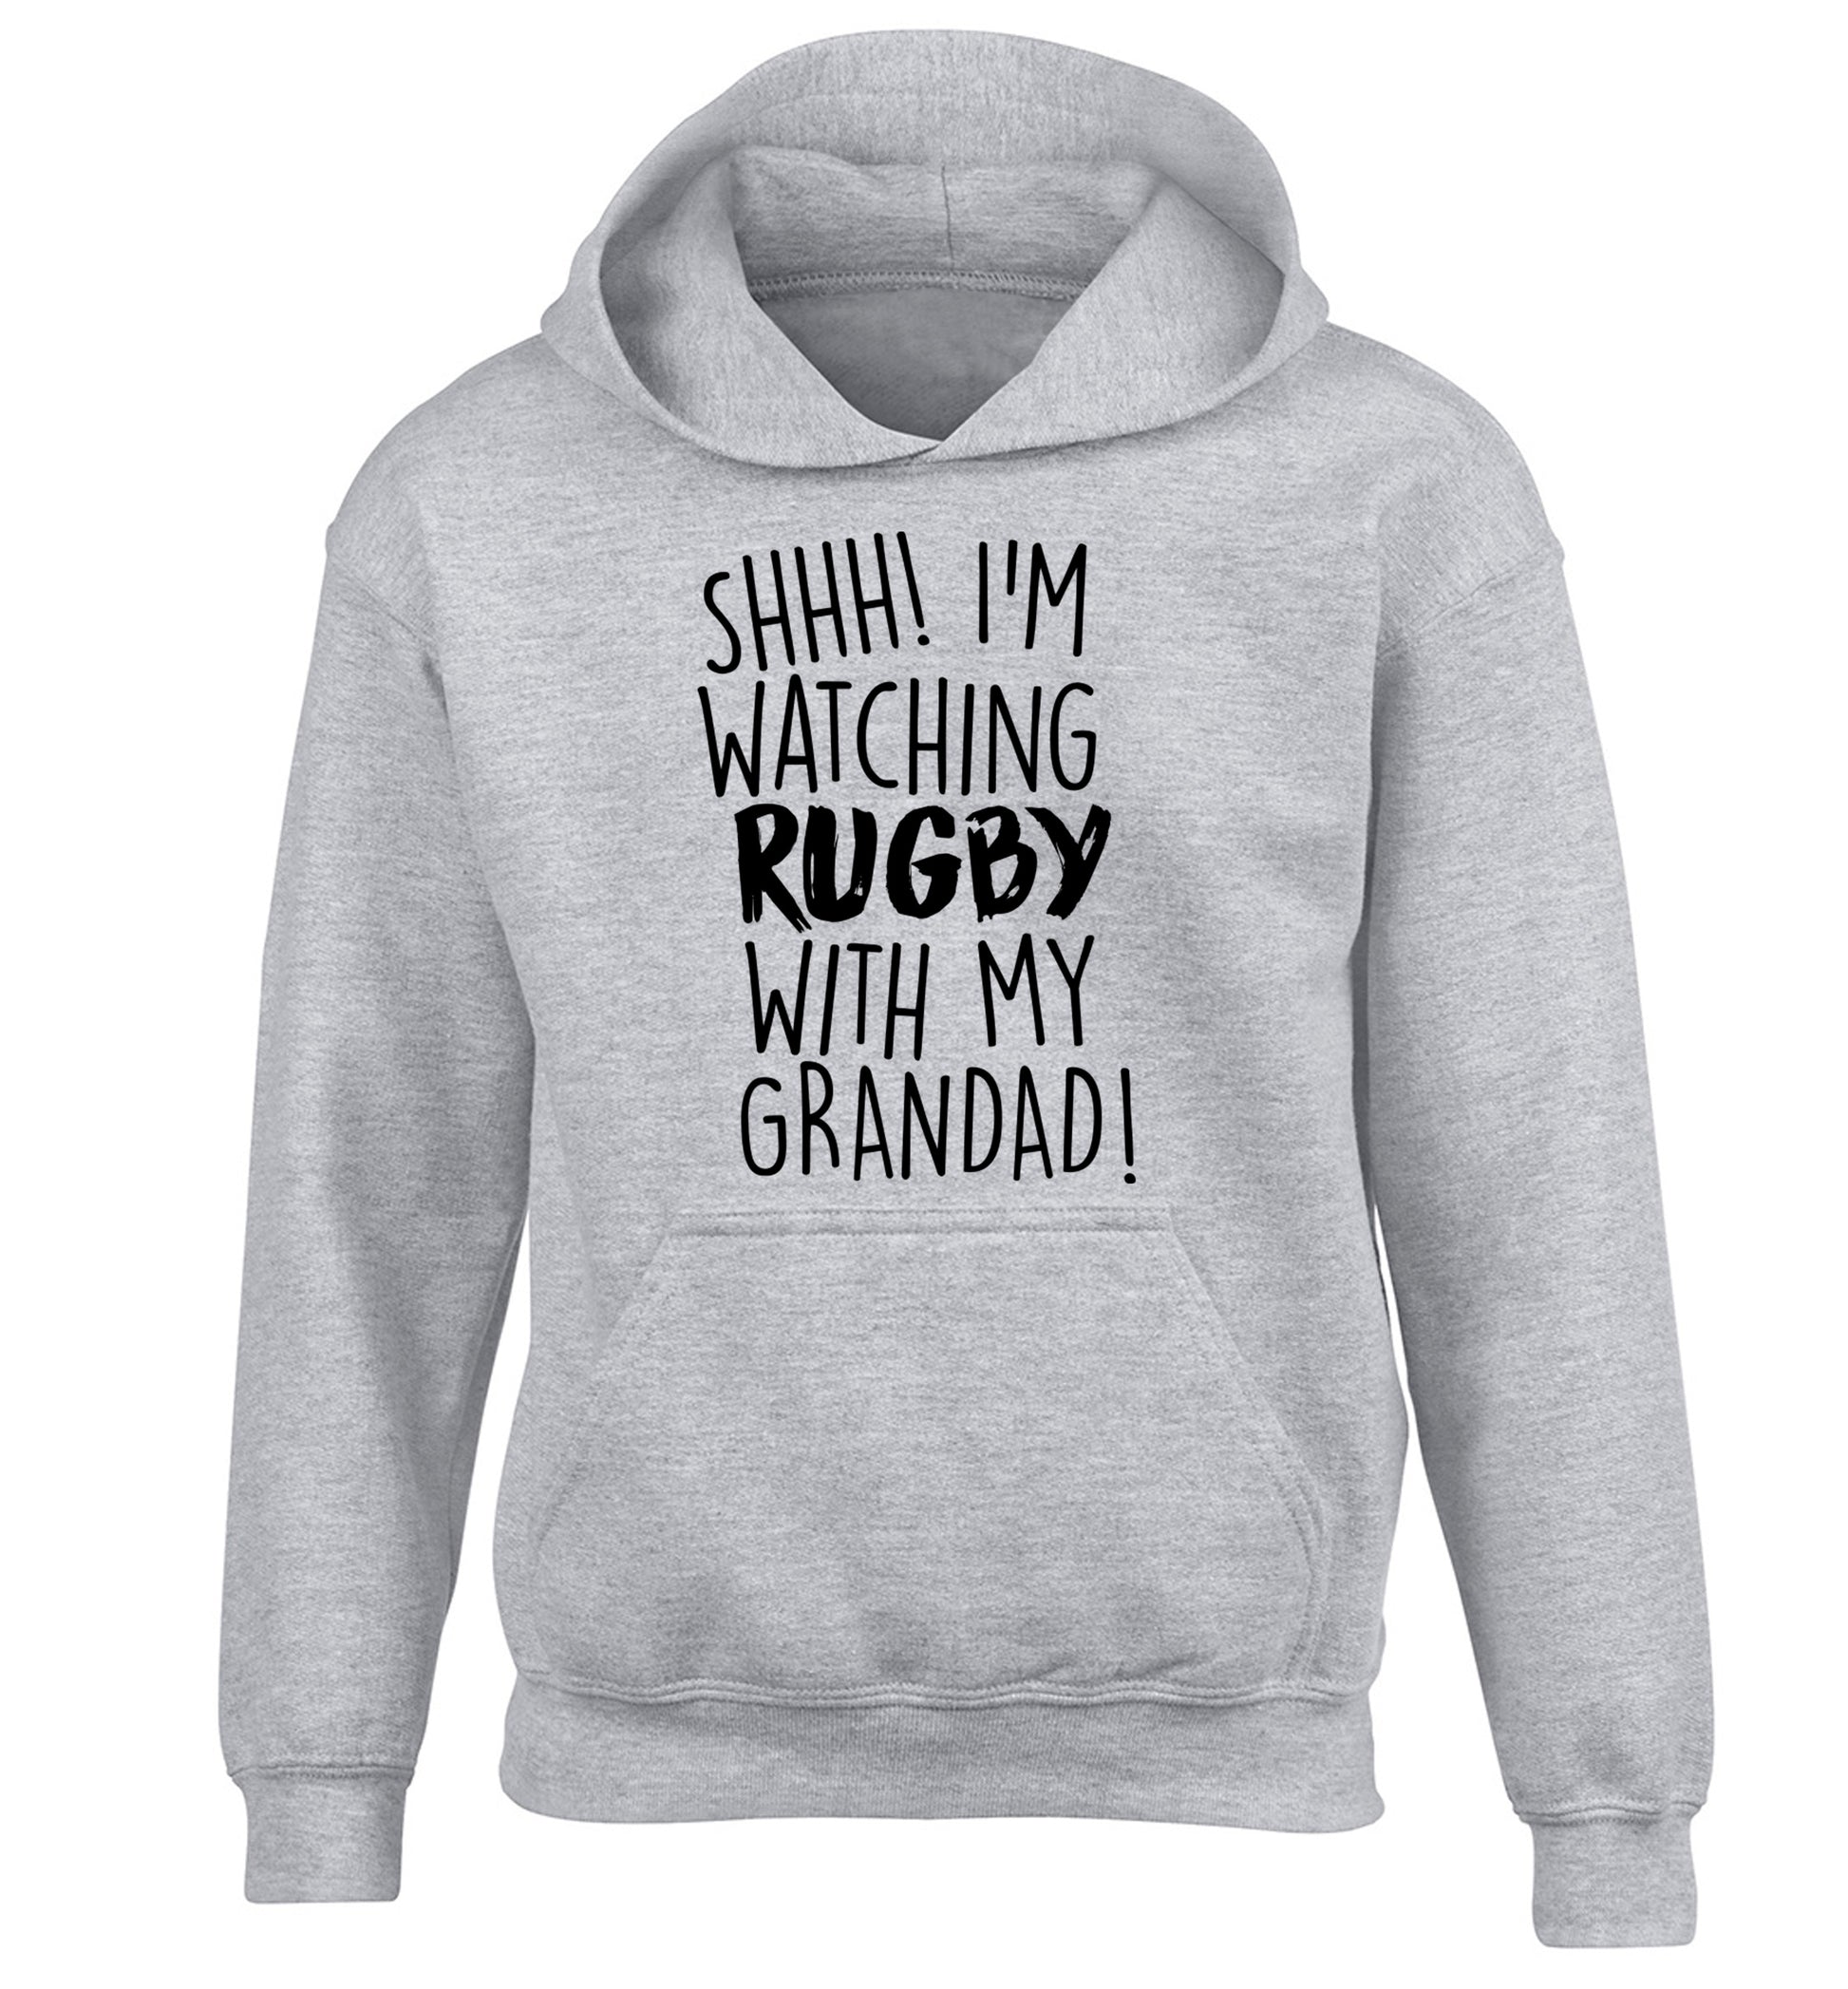 Shh I'm watching rugby with my grandaughter children's grey hoodie 12-13 Years